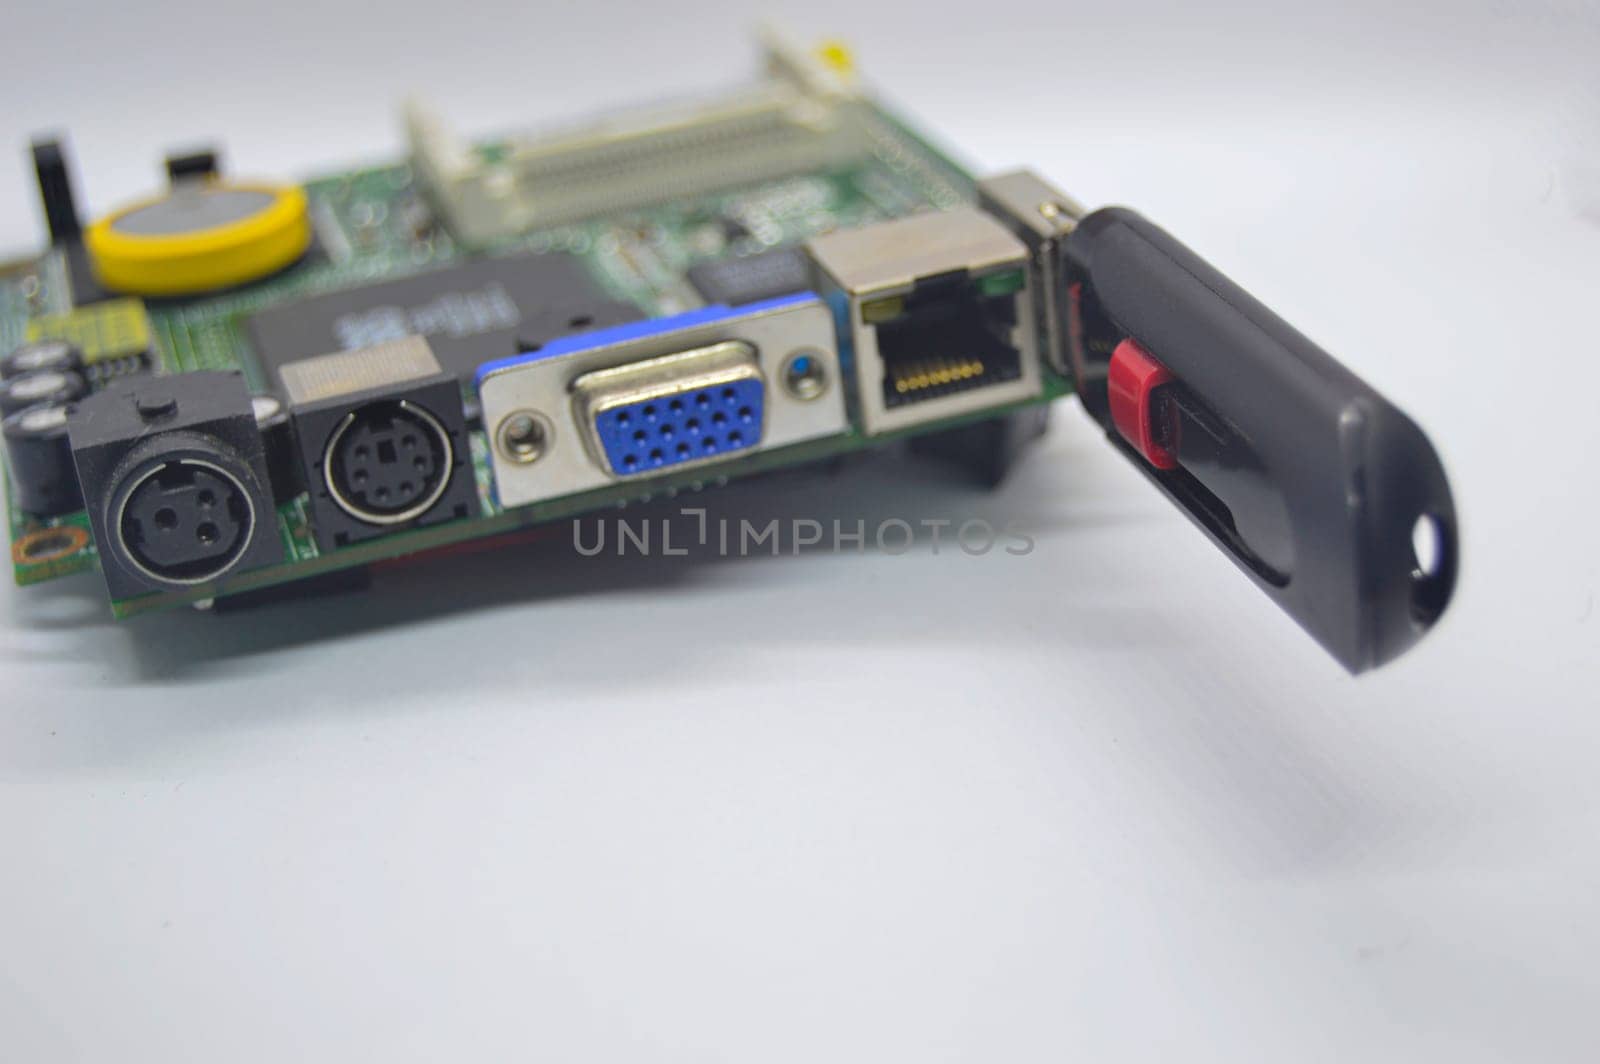 Flash drives and motherboards that are plugged together on a white background